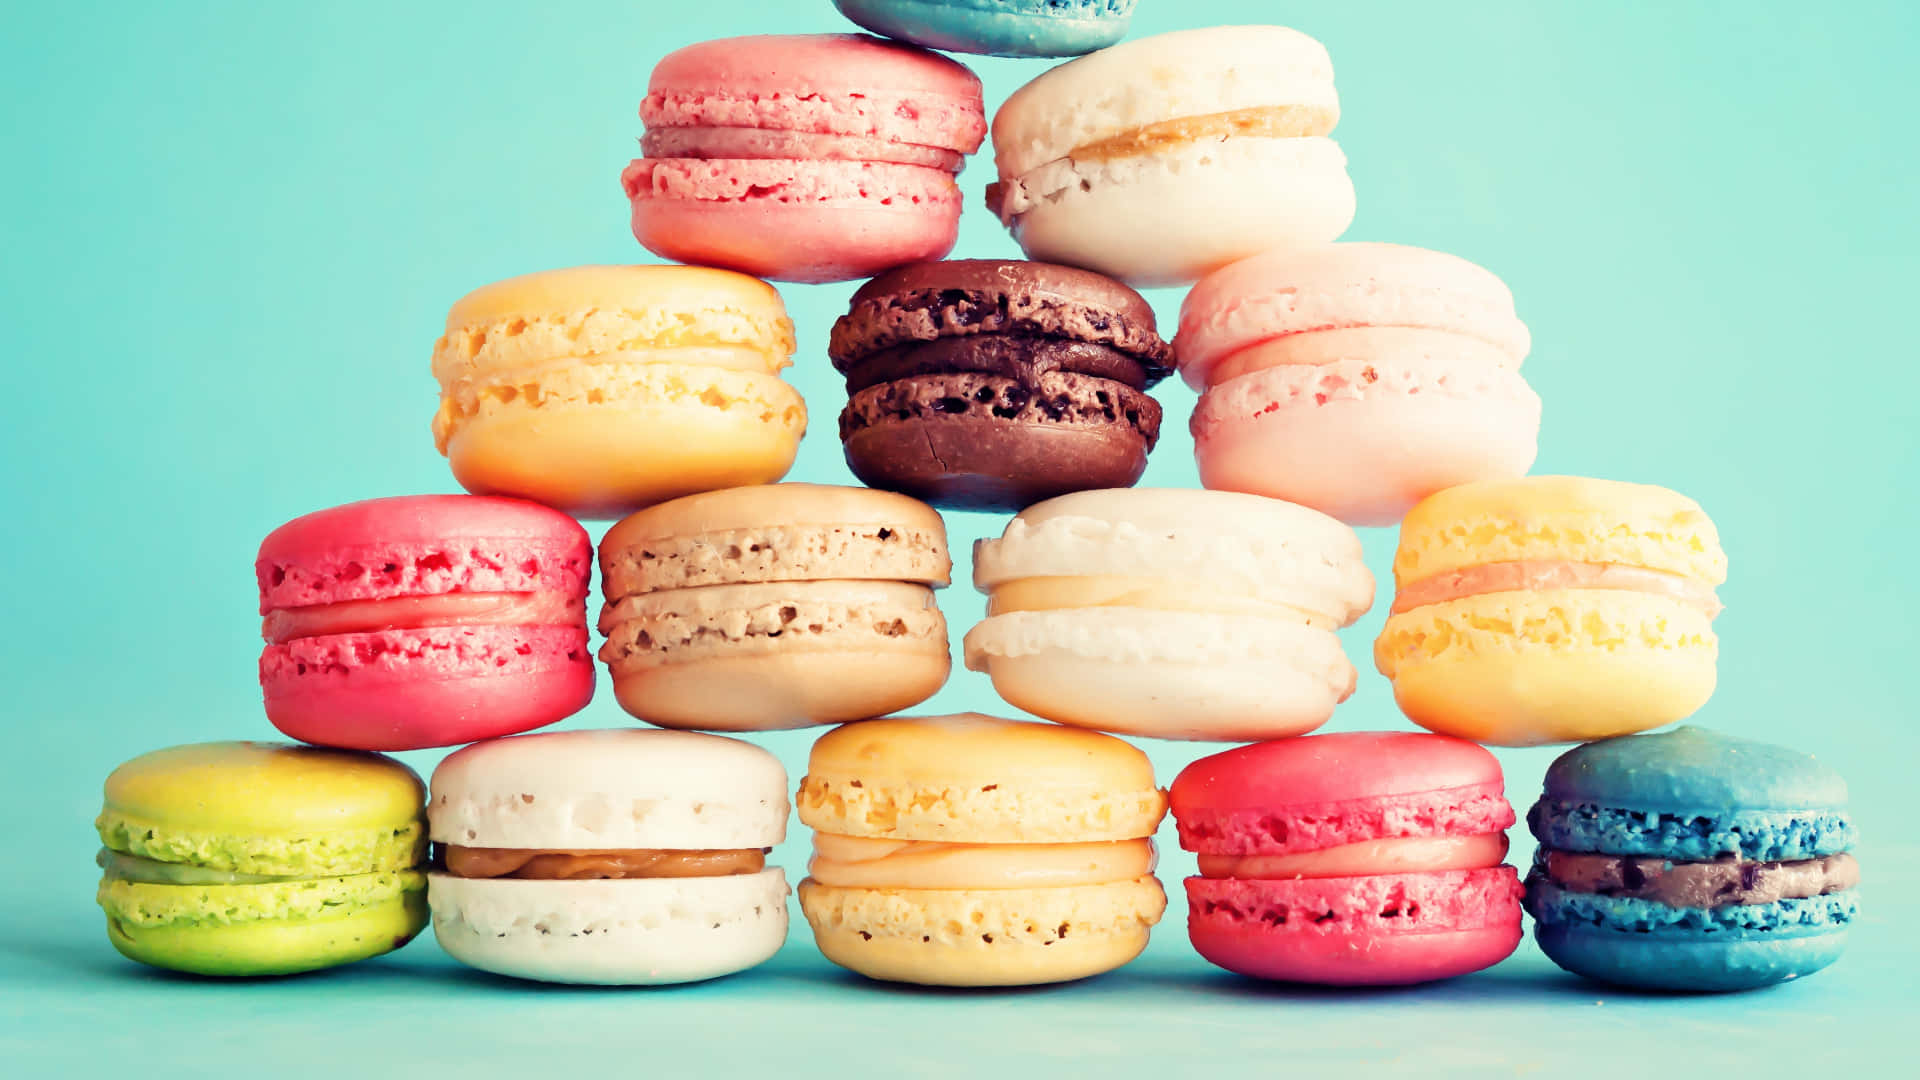 A Pyramid Of Macarons On A Blue Background